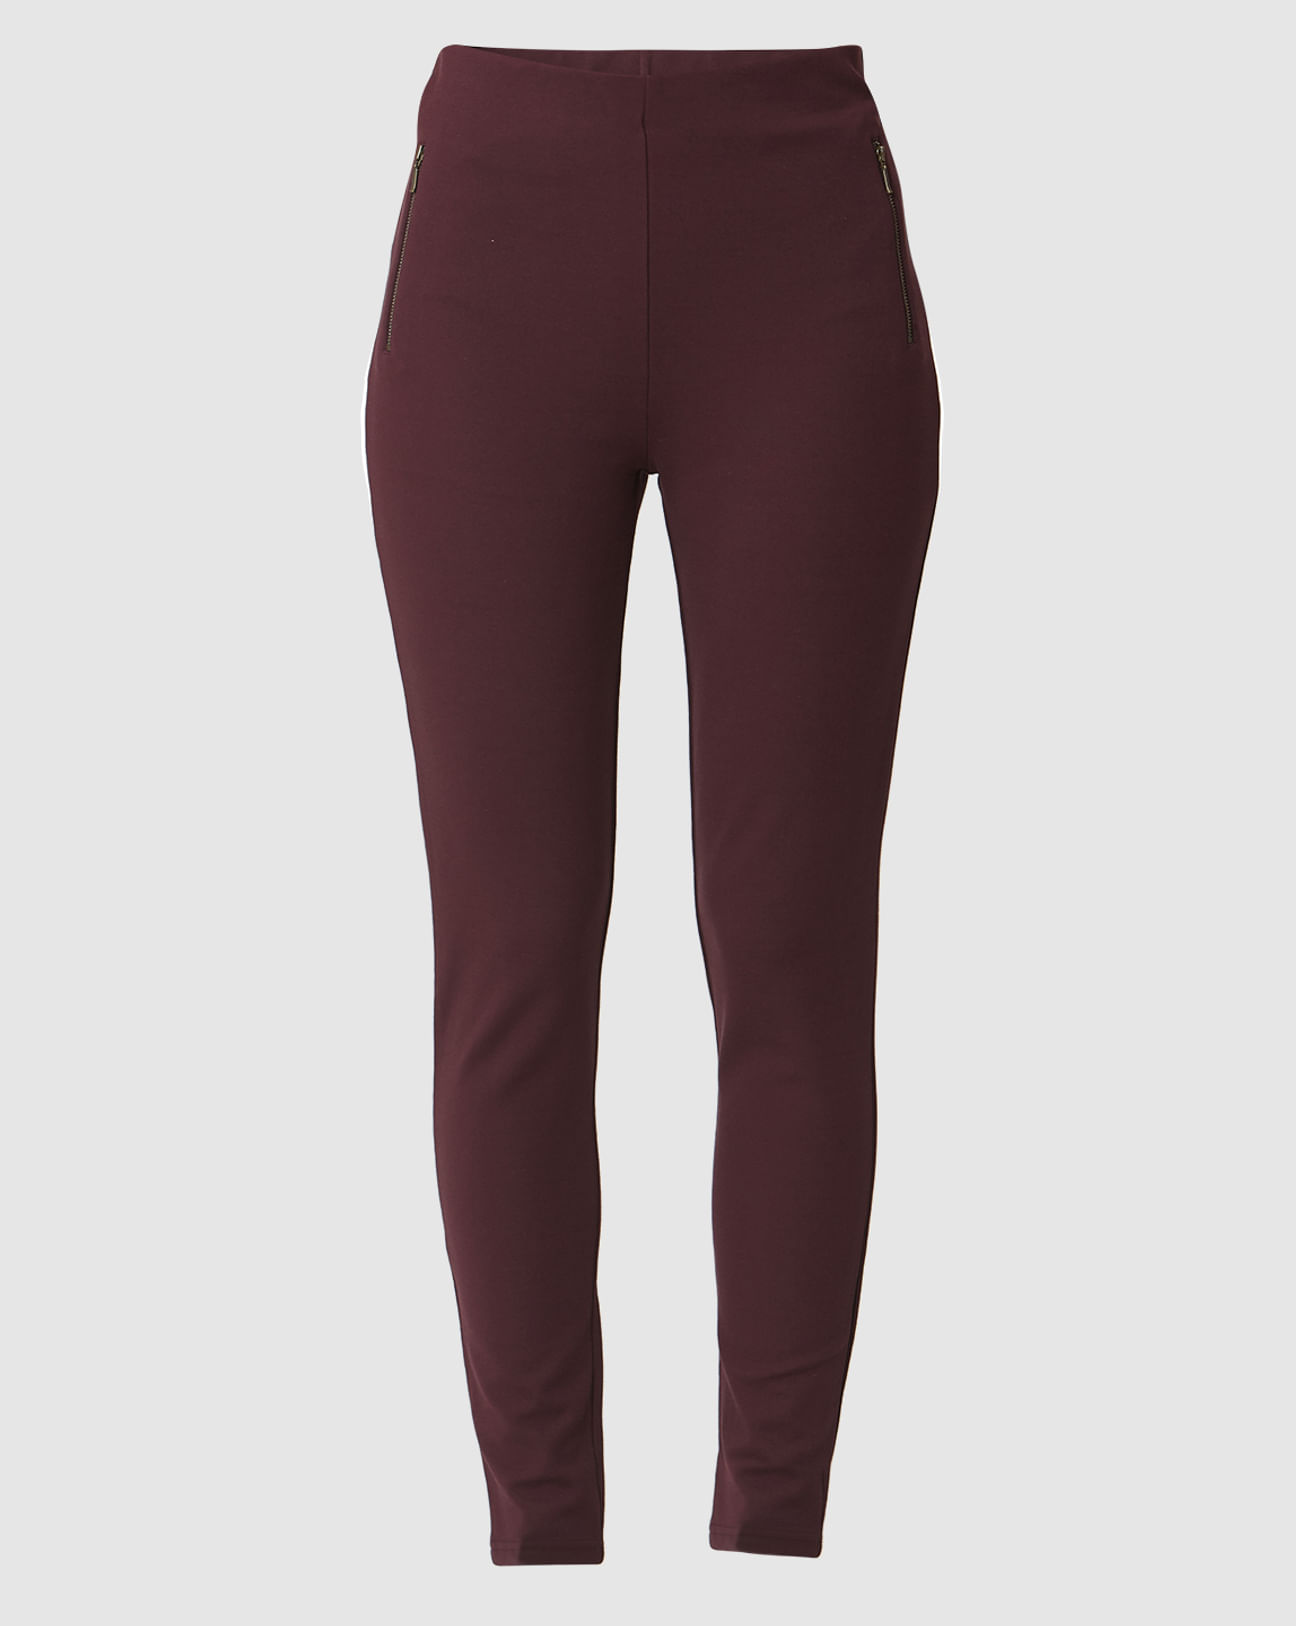 Balance Collection, Pants & Jumpsuits, Balance Collection Yoga Pants Size  Xs New With Tags